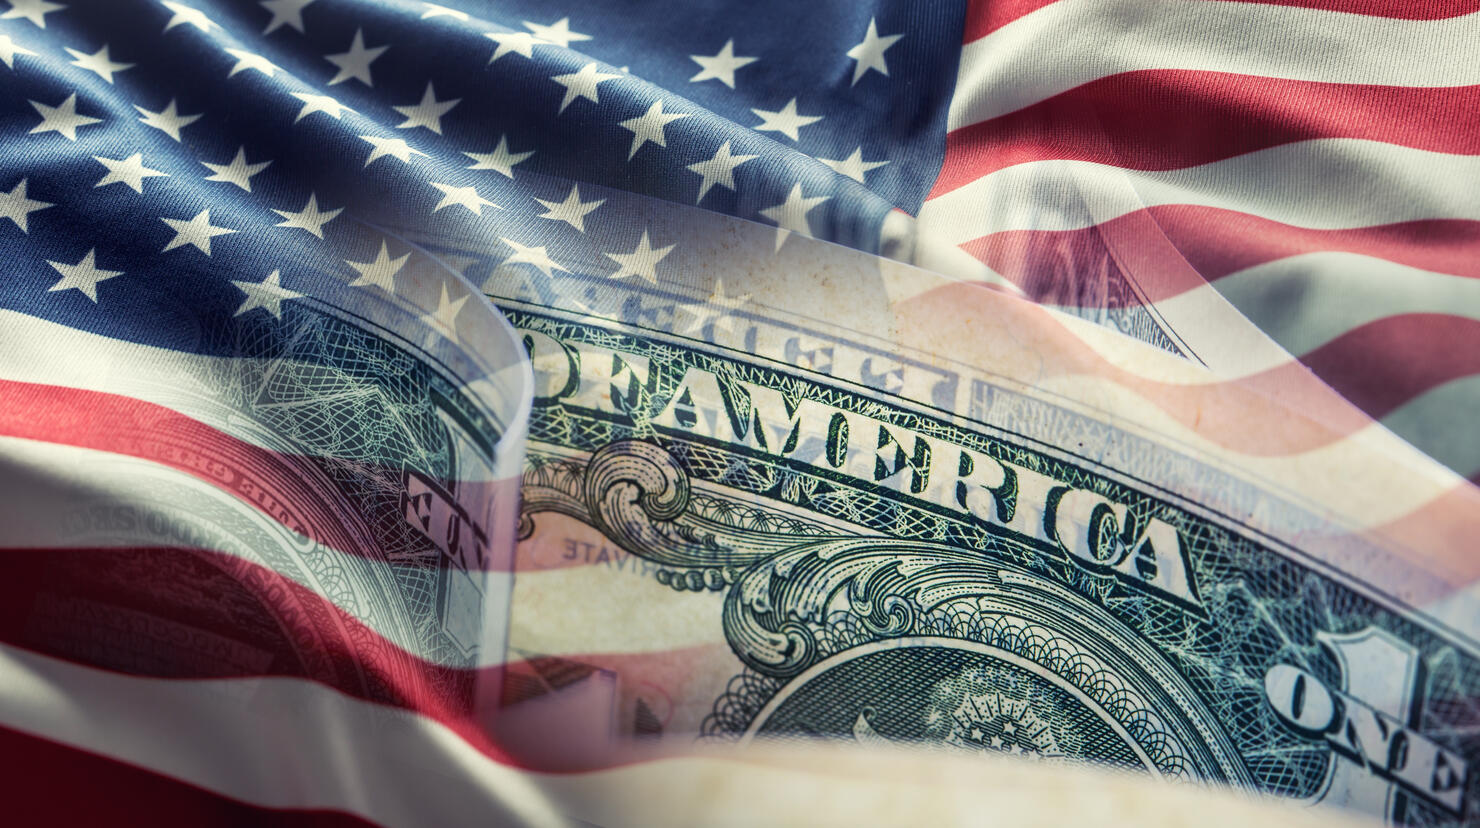 American flag and dollar banknotes - business background.